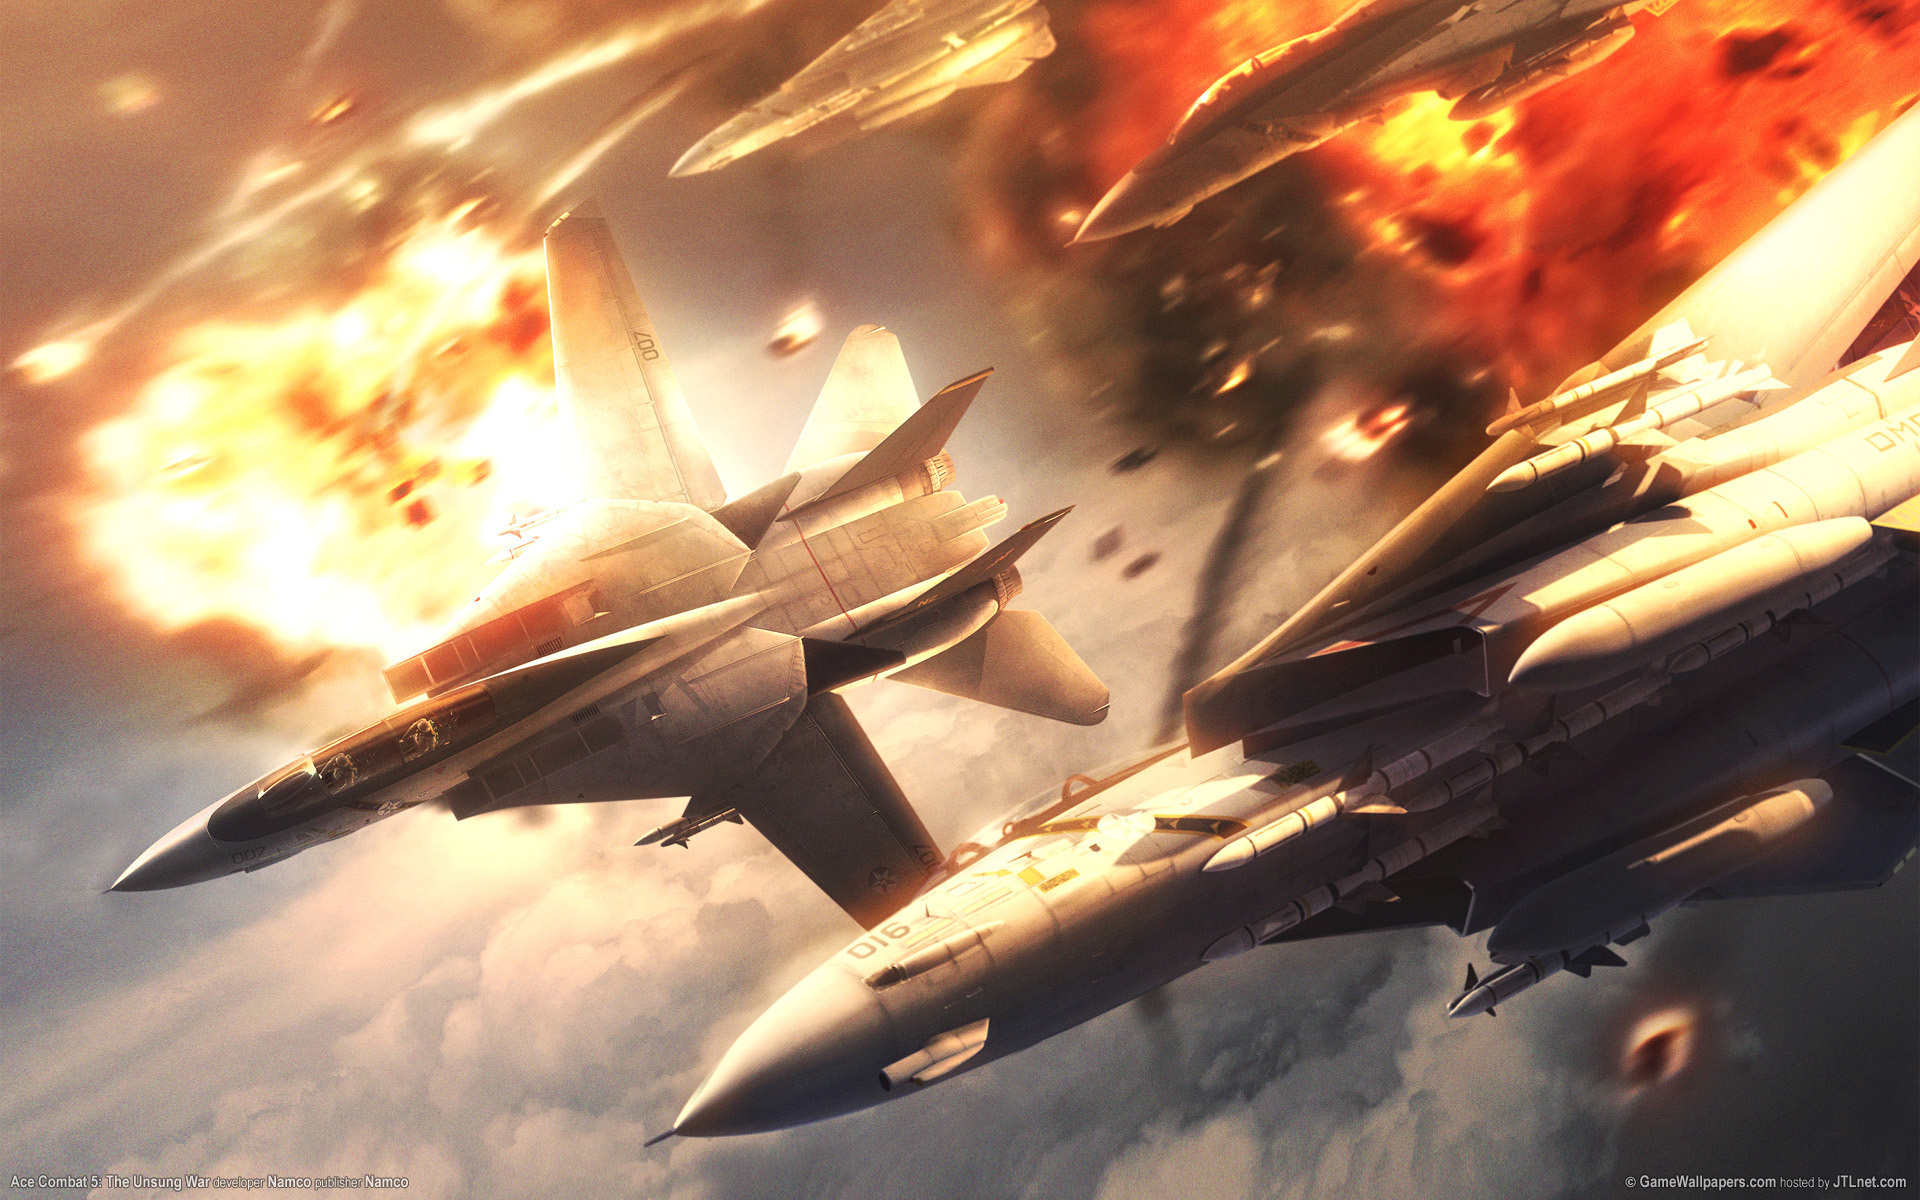 ace, Combat, Game, Jet, Airplane, Aircraft, Fighter, Plane, Military, Battle, Explosion, Fire Wallpaper